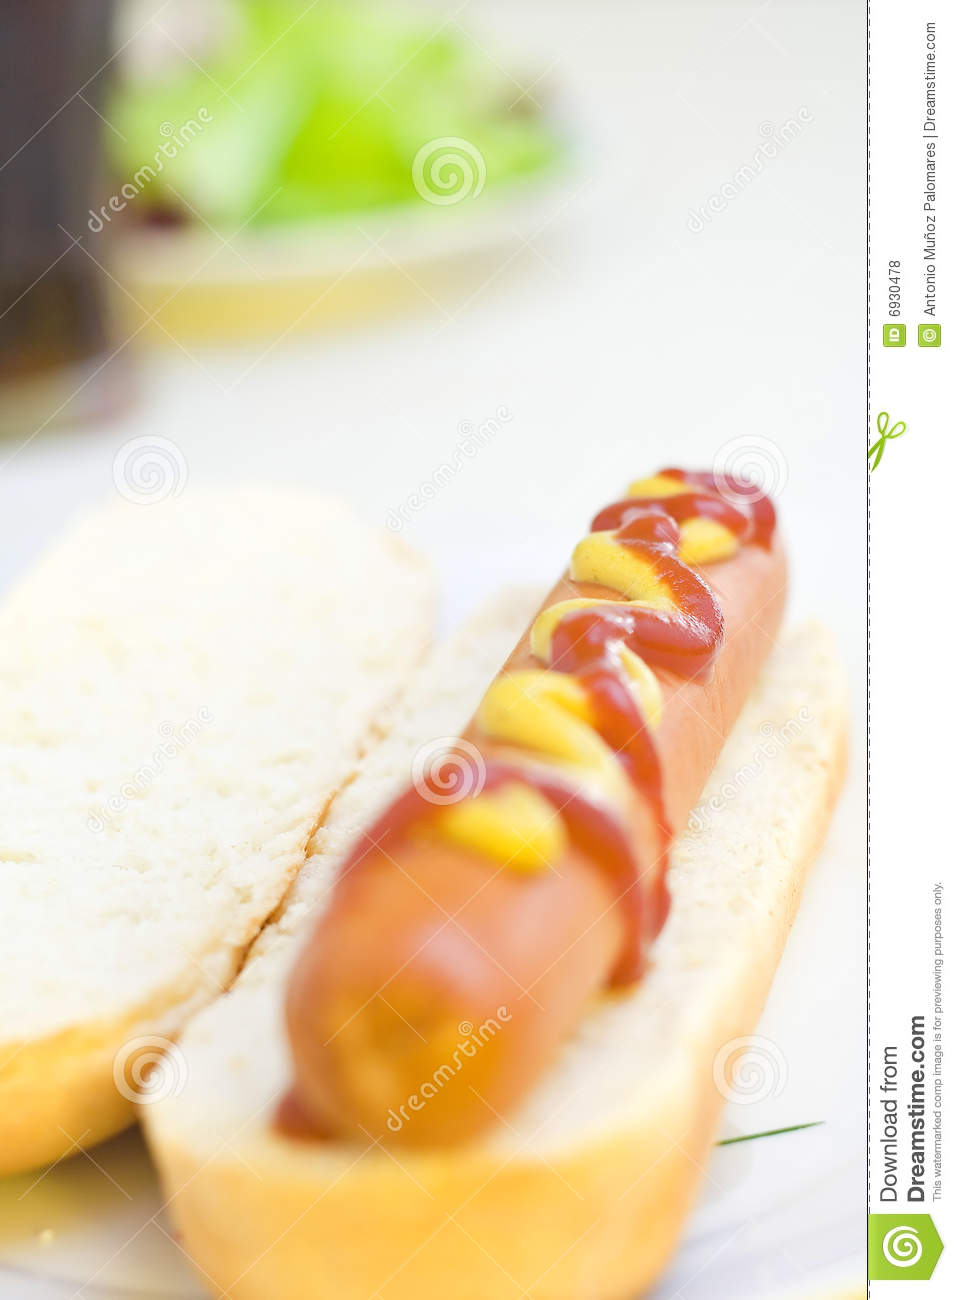 Fast Food Delicious Hot Dog Royalty Free Stock Photos   Image  6930478